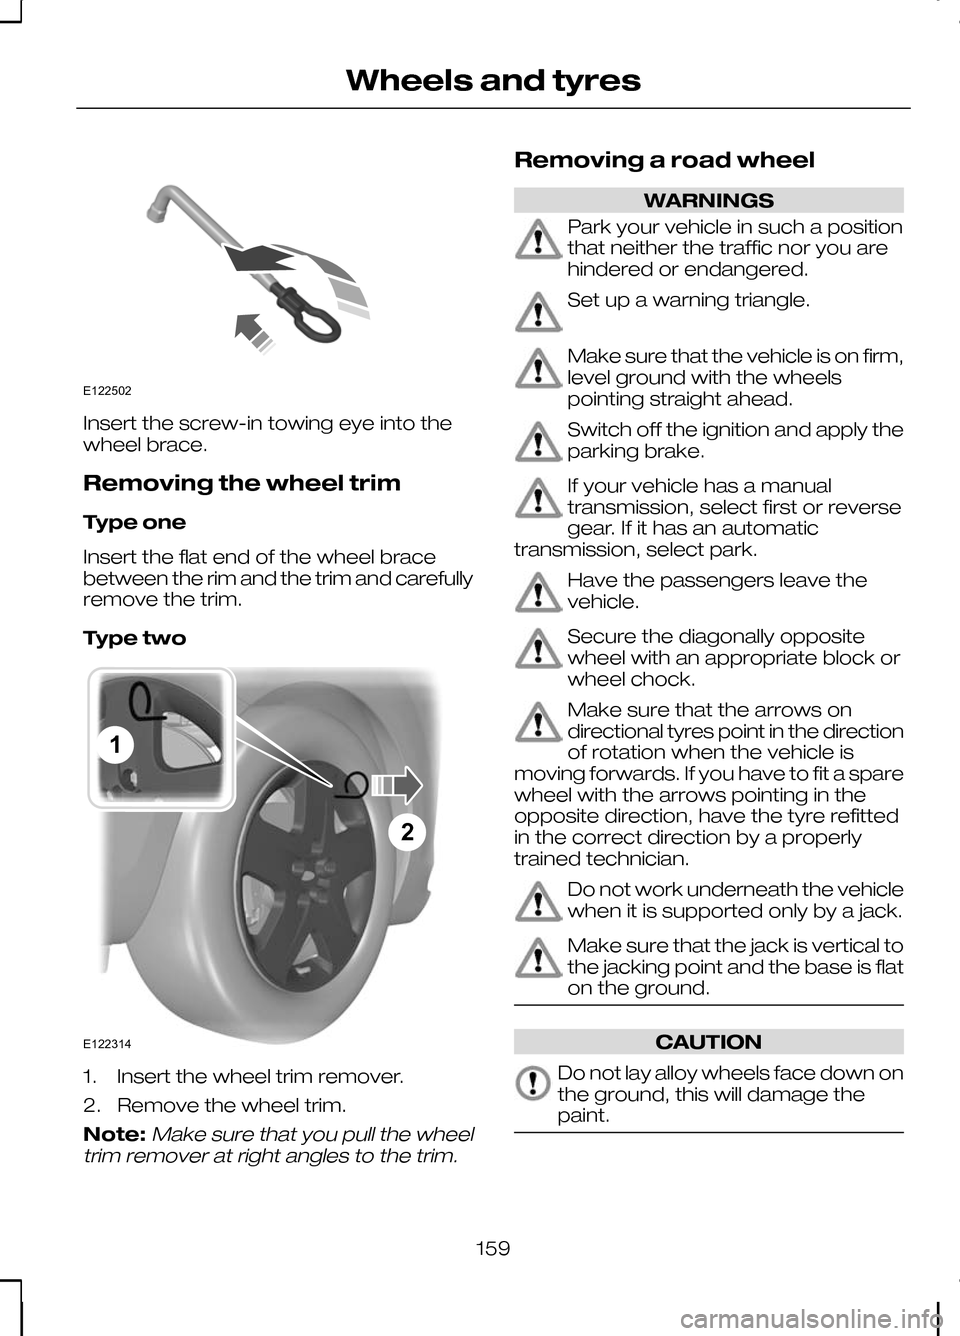 FORD KUGA 2010 1.G User Guide Insert the screw-in towing eye into the
wheel brace.
Removing the wheel trim
Type one
Insert the flat end of the wheel brace
between the rim and the trim and carefully
remove the trim.
Type two
1. Ins